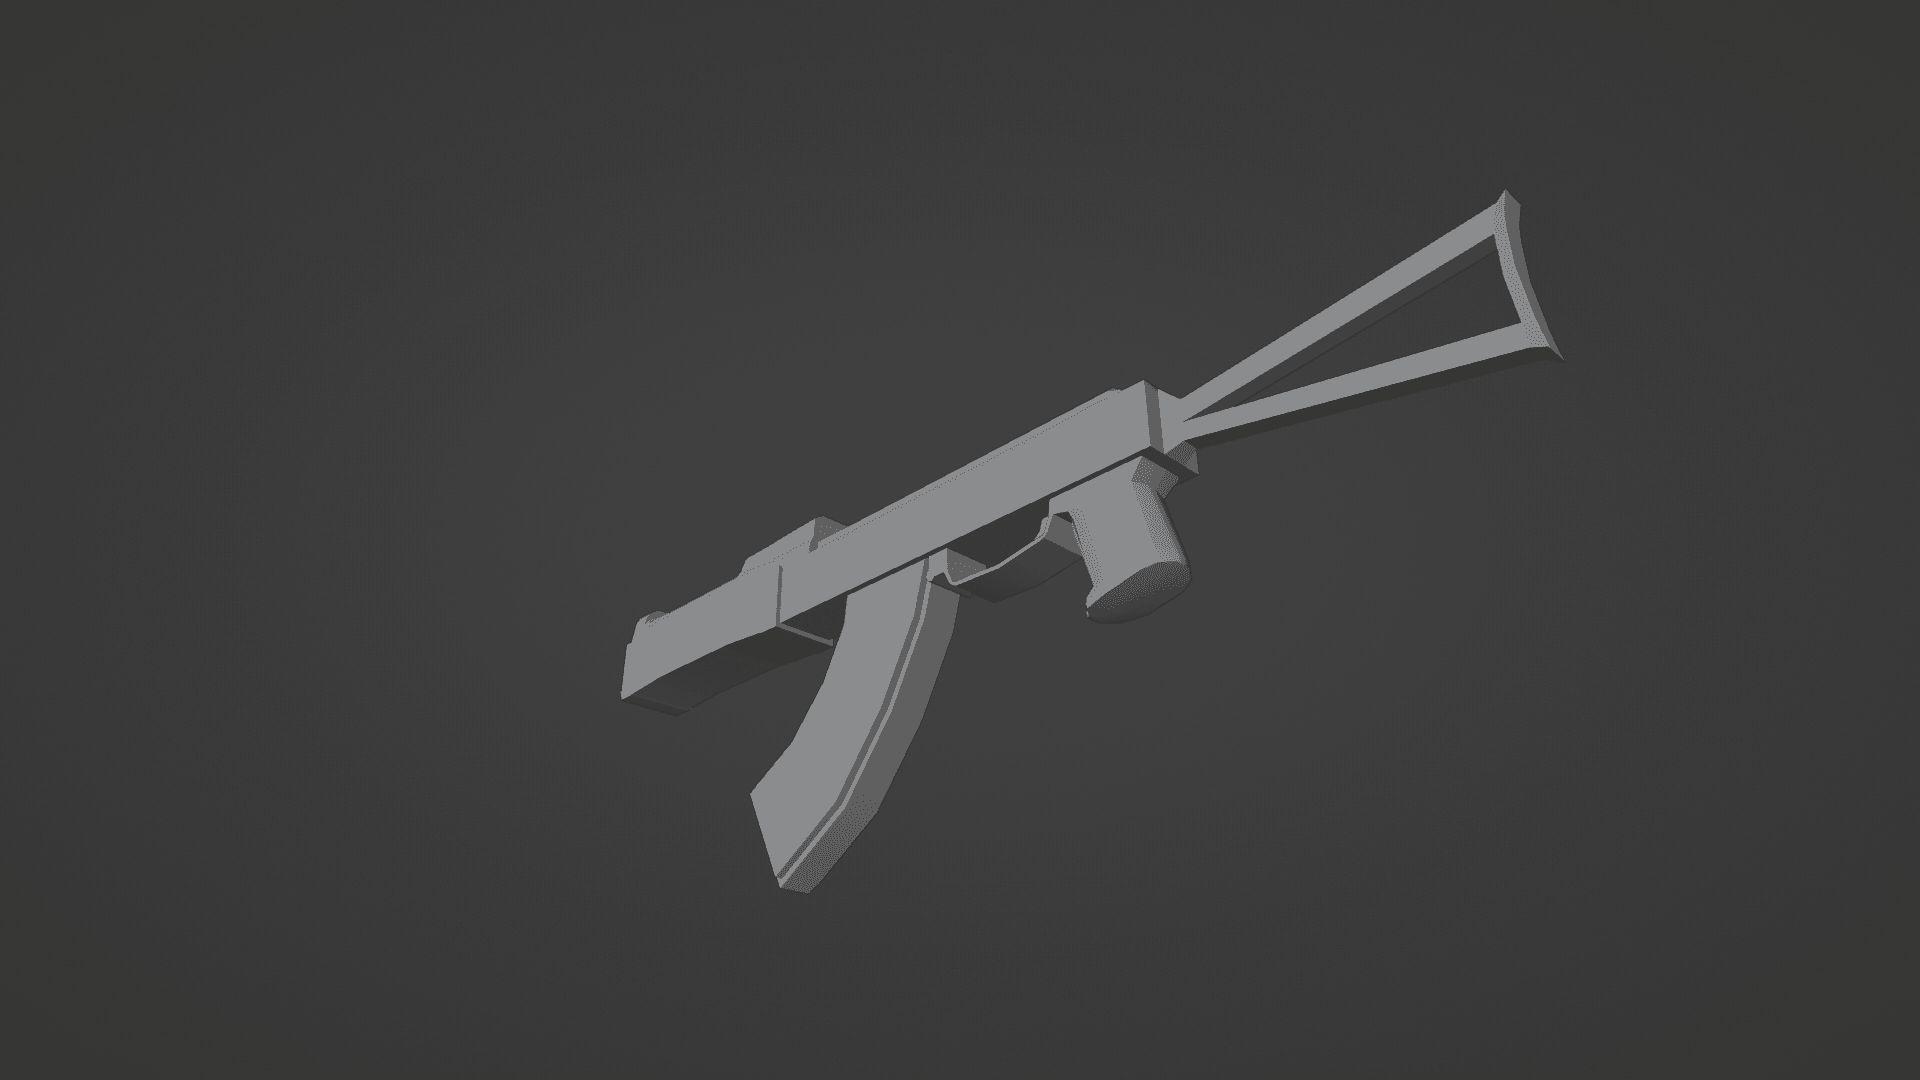 LOWPOLY AKS74 SMG for 3D printing 3d model